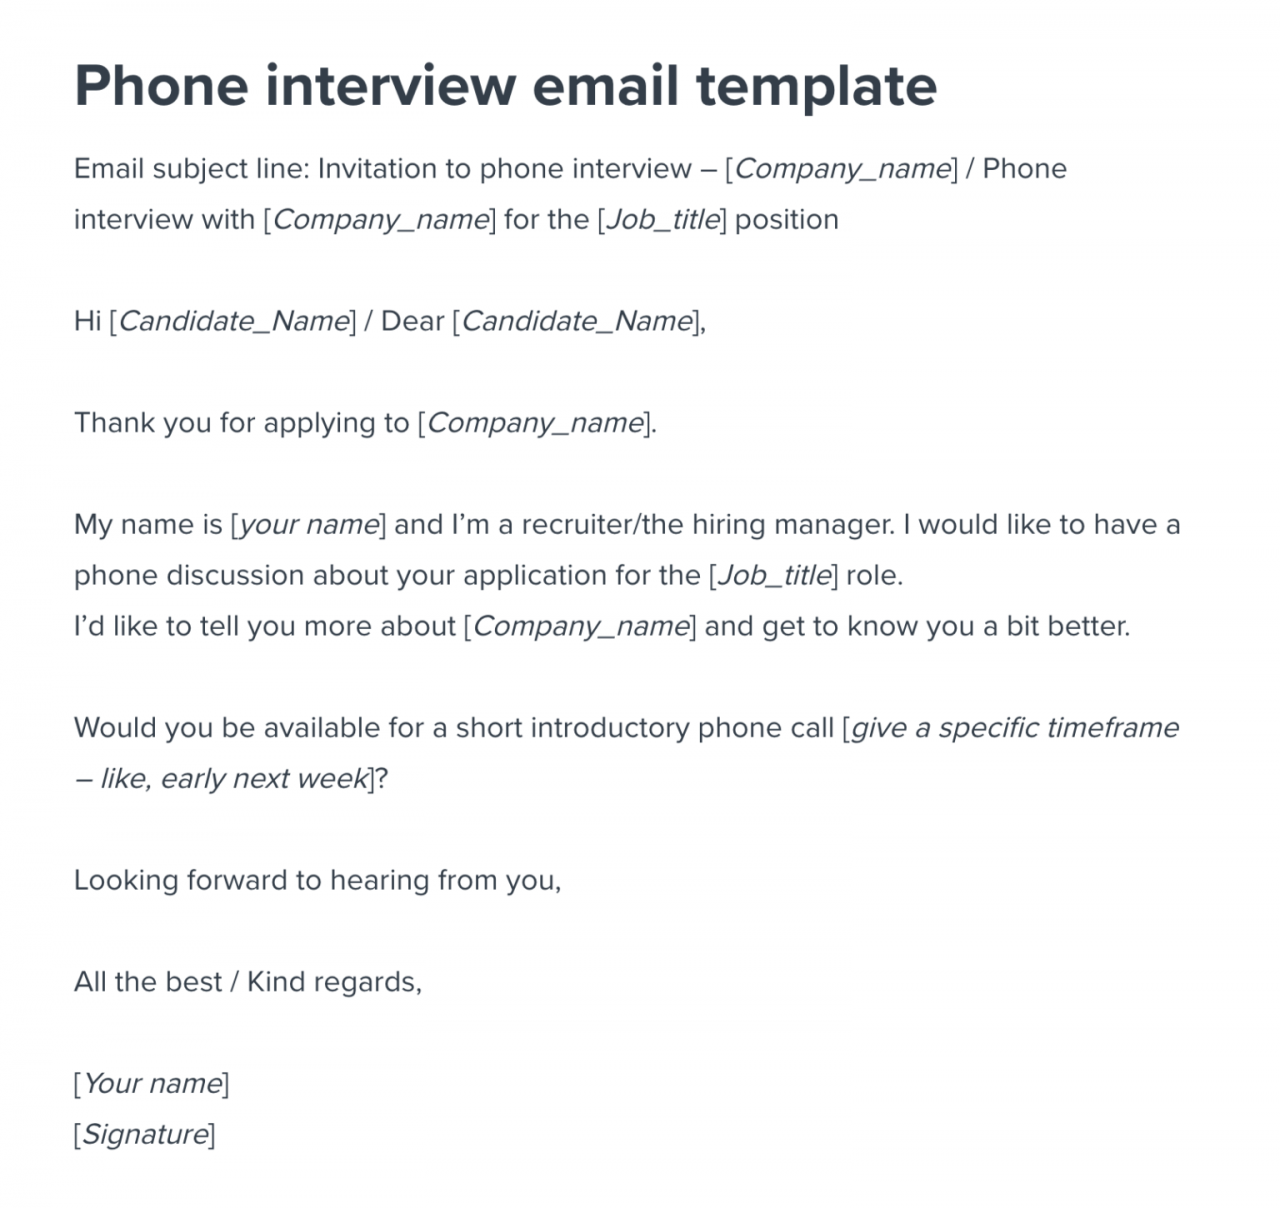 Best way to respond to an interview email